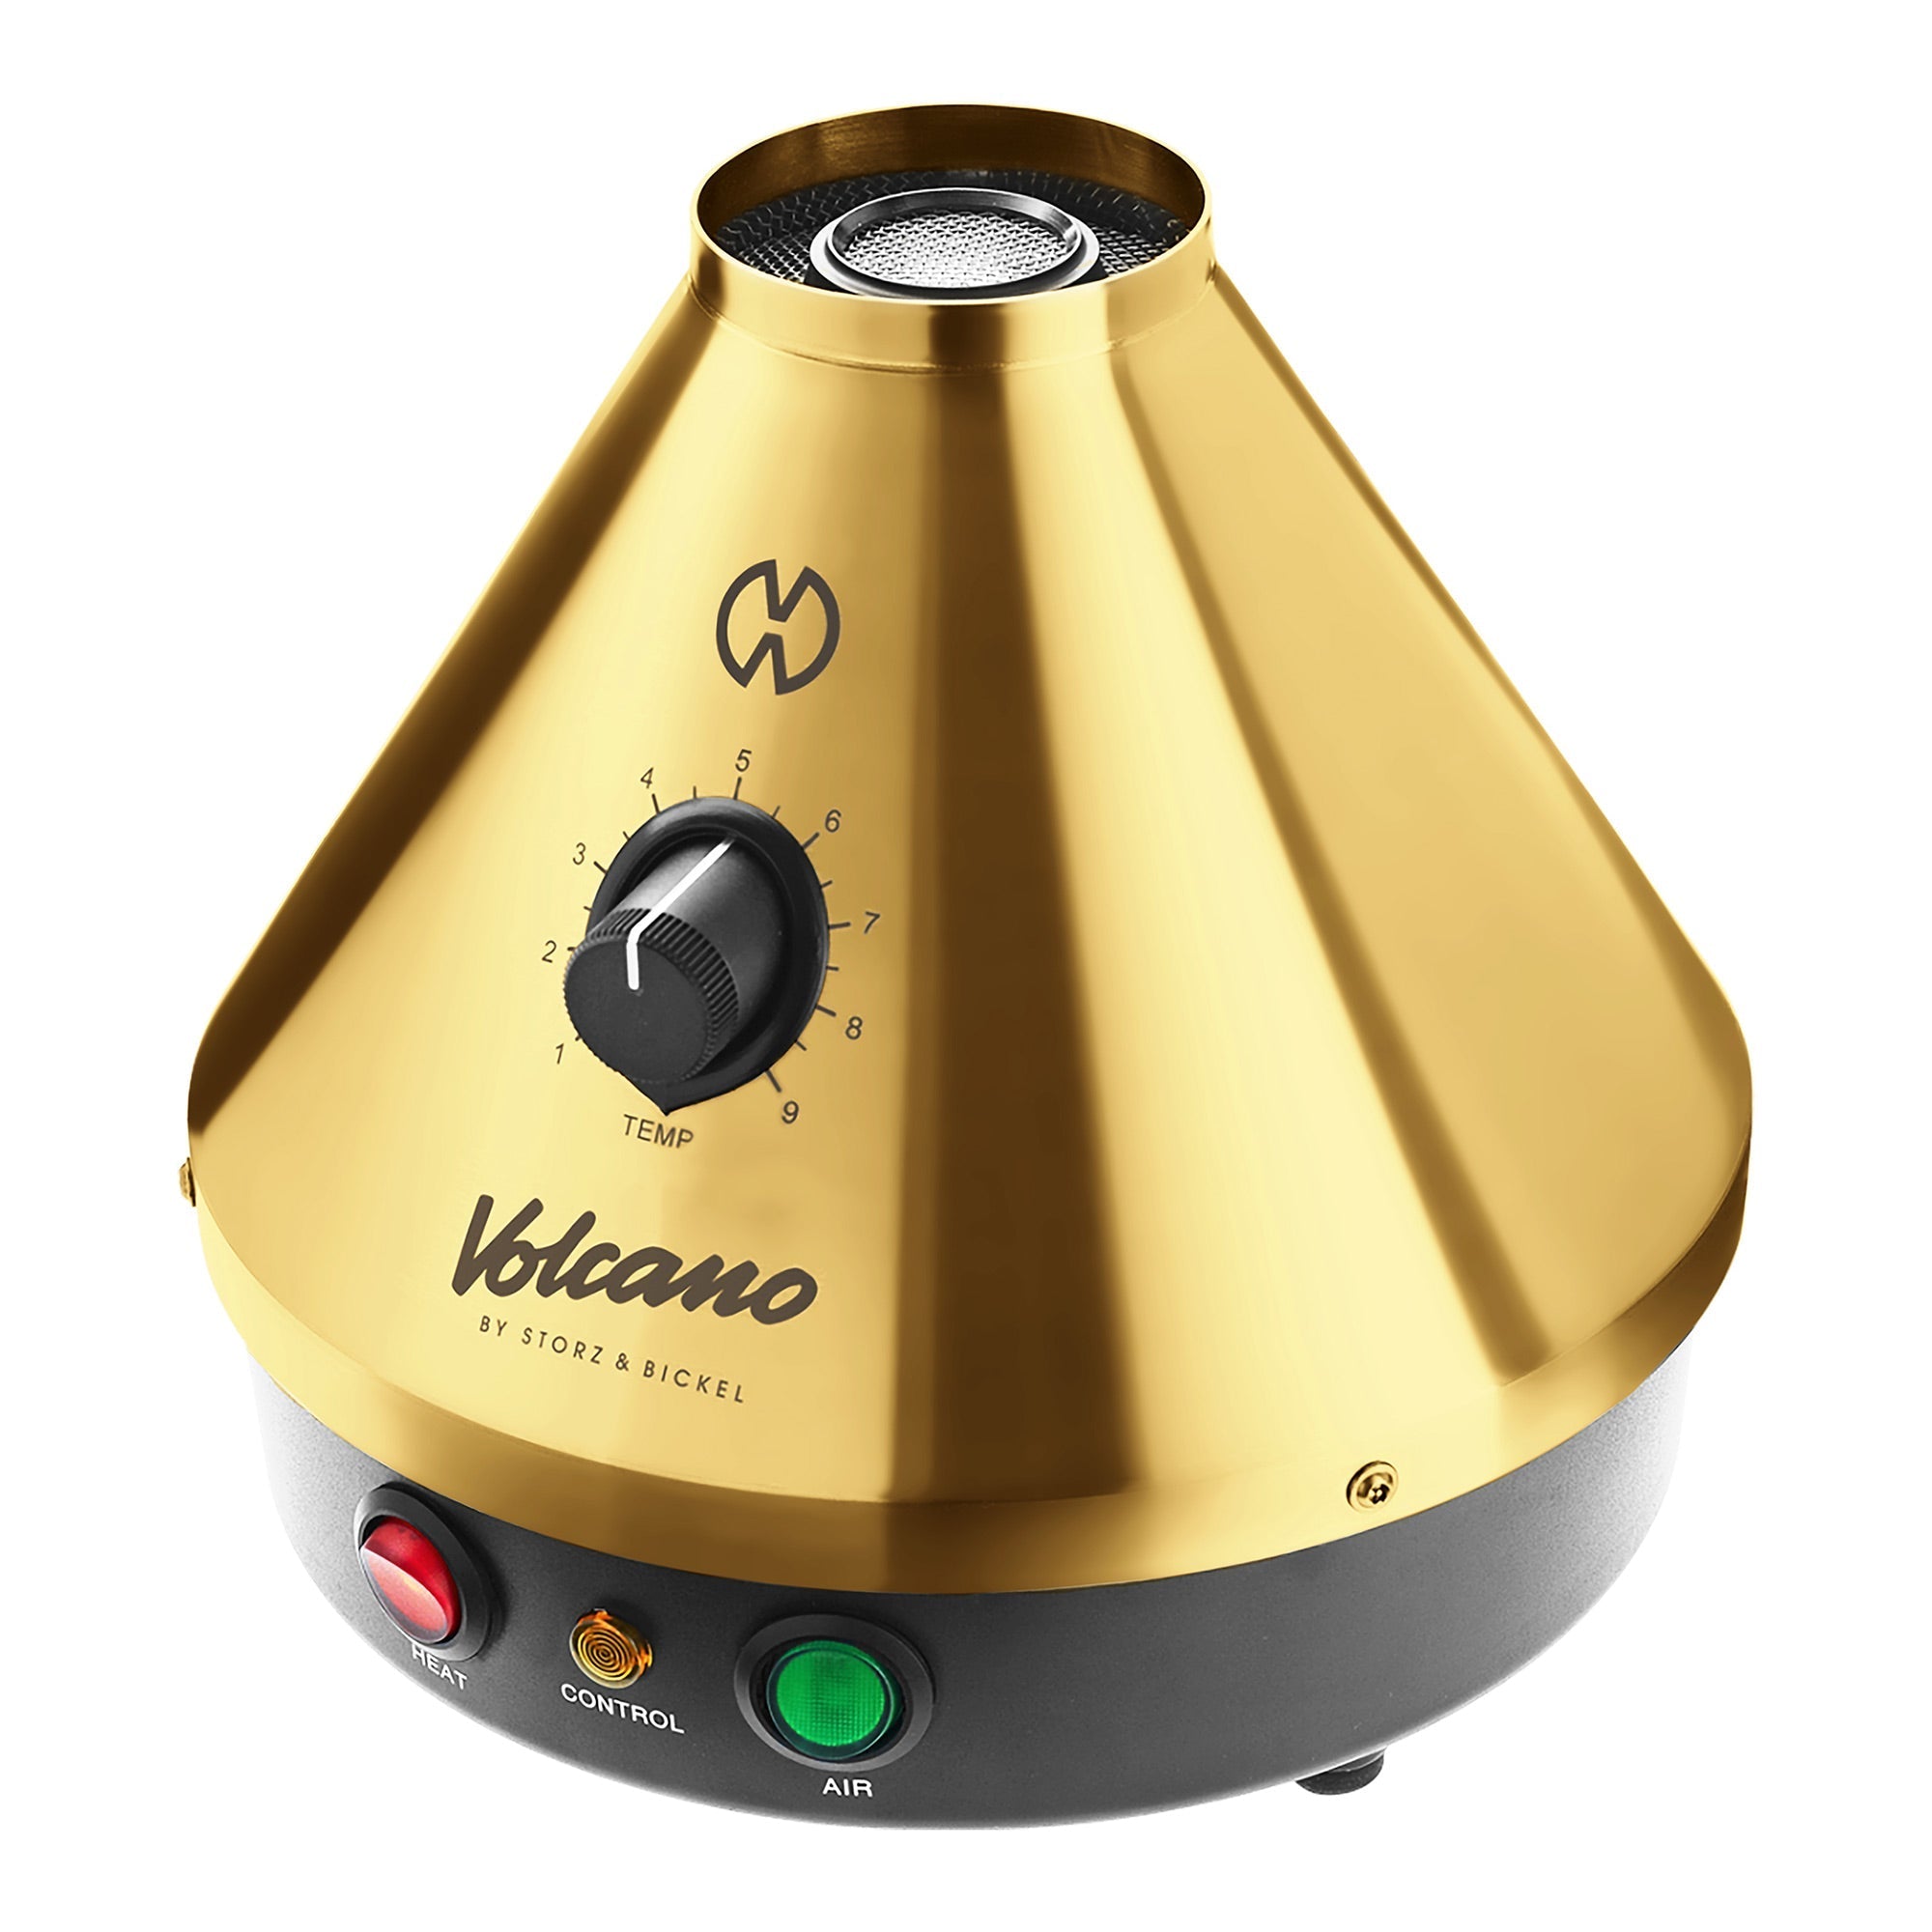 Volcano Classic Gold 20 Year Special Edition